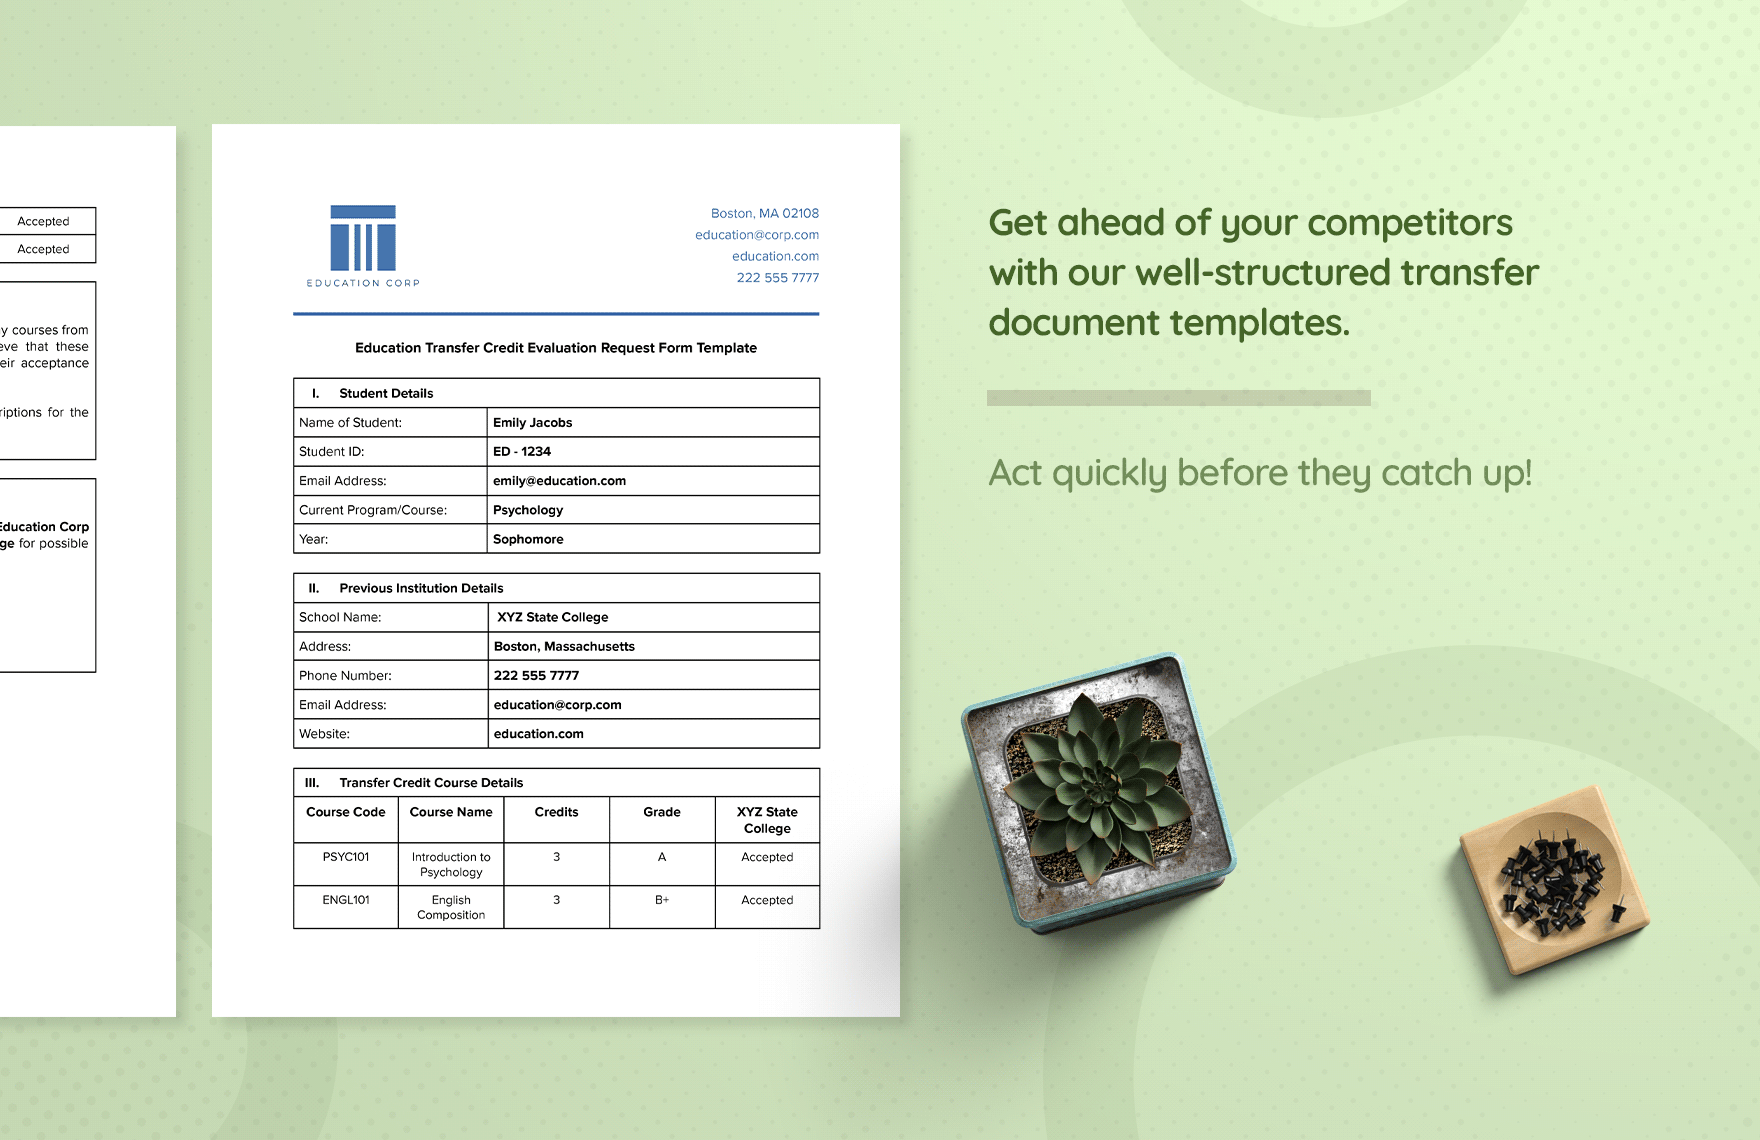 Education Transfer Credit Evaluation Request Form Template